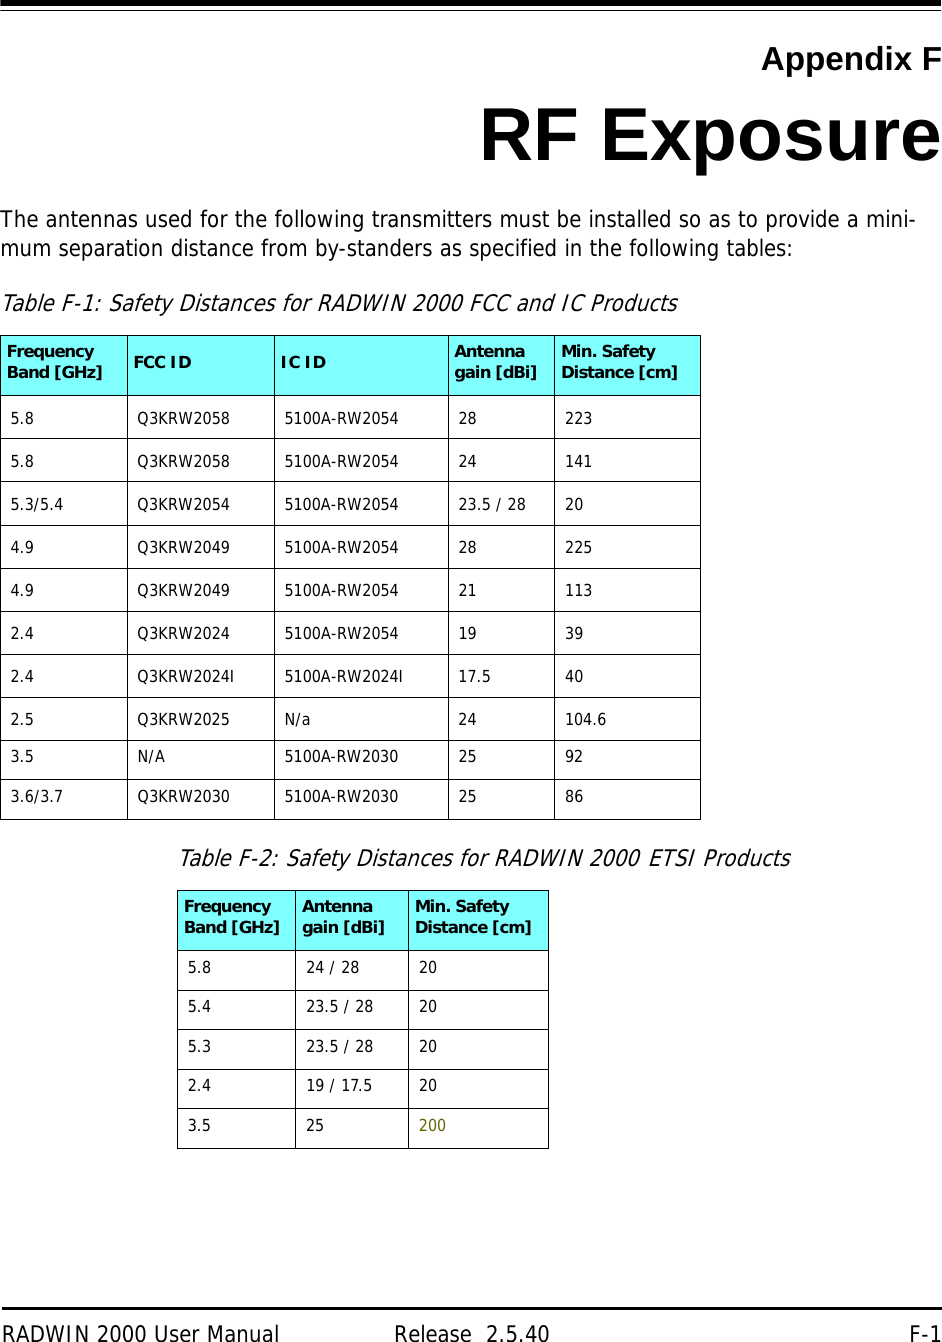 RADWIN 2000 User Manual Release  2.5.40 F-1Appendix FRF ExposureThe antennas used for the following transmitters must be installed so as to provide a mini-mum separation distance from by-standers as specified in the following tables:Table F-1: Safety Distances for RADWIN 2000 FCC and IC ProductsFrequency Band [GHz] FCC ID IC ID Antenna gain [dBi] Min. Safety Distance [cm]5.8 Q3KRW2058 5100A-RW2054 28 2235.8 Q3KRW2058 5100A-RW2054 24 1415.3/5.4 Q3KRW2054 5100A-RW2054 23.5 / 28 204.9 Q3KRW2049 5100A-RW2054 28 2254.9 Q3KRW2049 5100A-RW2054 21 1132.4 Q3KRW2024 5100A-RW2054 19 392.4 Q3KRW2024I 5100A-RW2024I 17.5 402.5 Q3KRW2025 N/a 24 104.63.5 N/A 5100A-RW2030 25 923.6/3.7 Q3KRW2030 5100A-RW2030 25 86Table F-2: Safety Distances for RADWIN 2000 ETSI ProductsFrequency Band [GHz] Antenna gain [dBi] Min. Safety Distance [cm]5.8 24 / 28 205.4 23.5 / 28 205.3 23.5 / 28 202.4 19 / 17.5 203.5 25 200